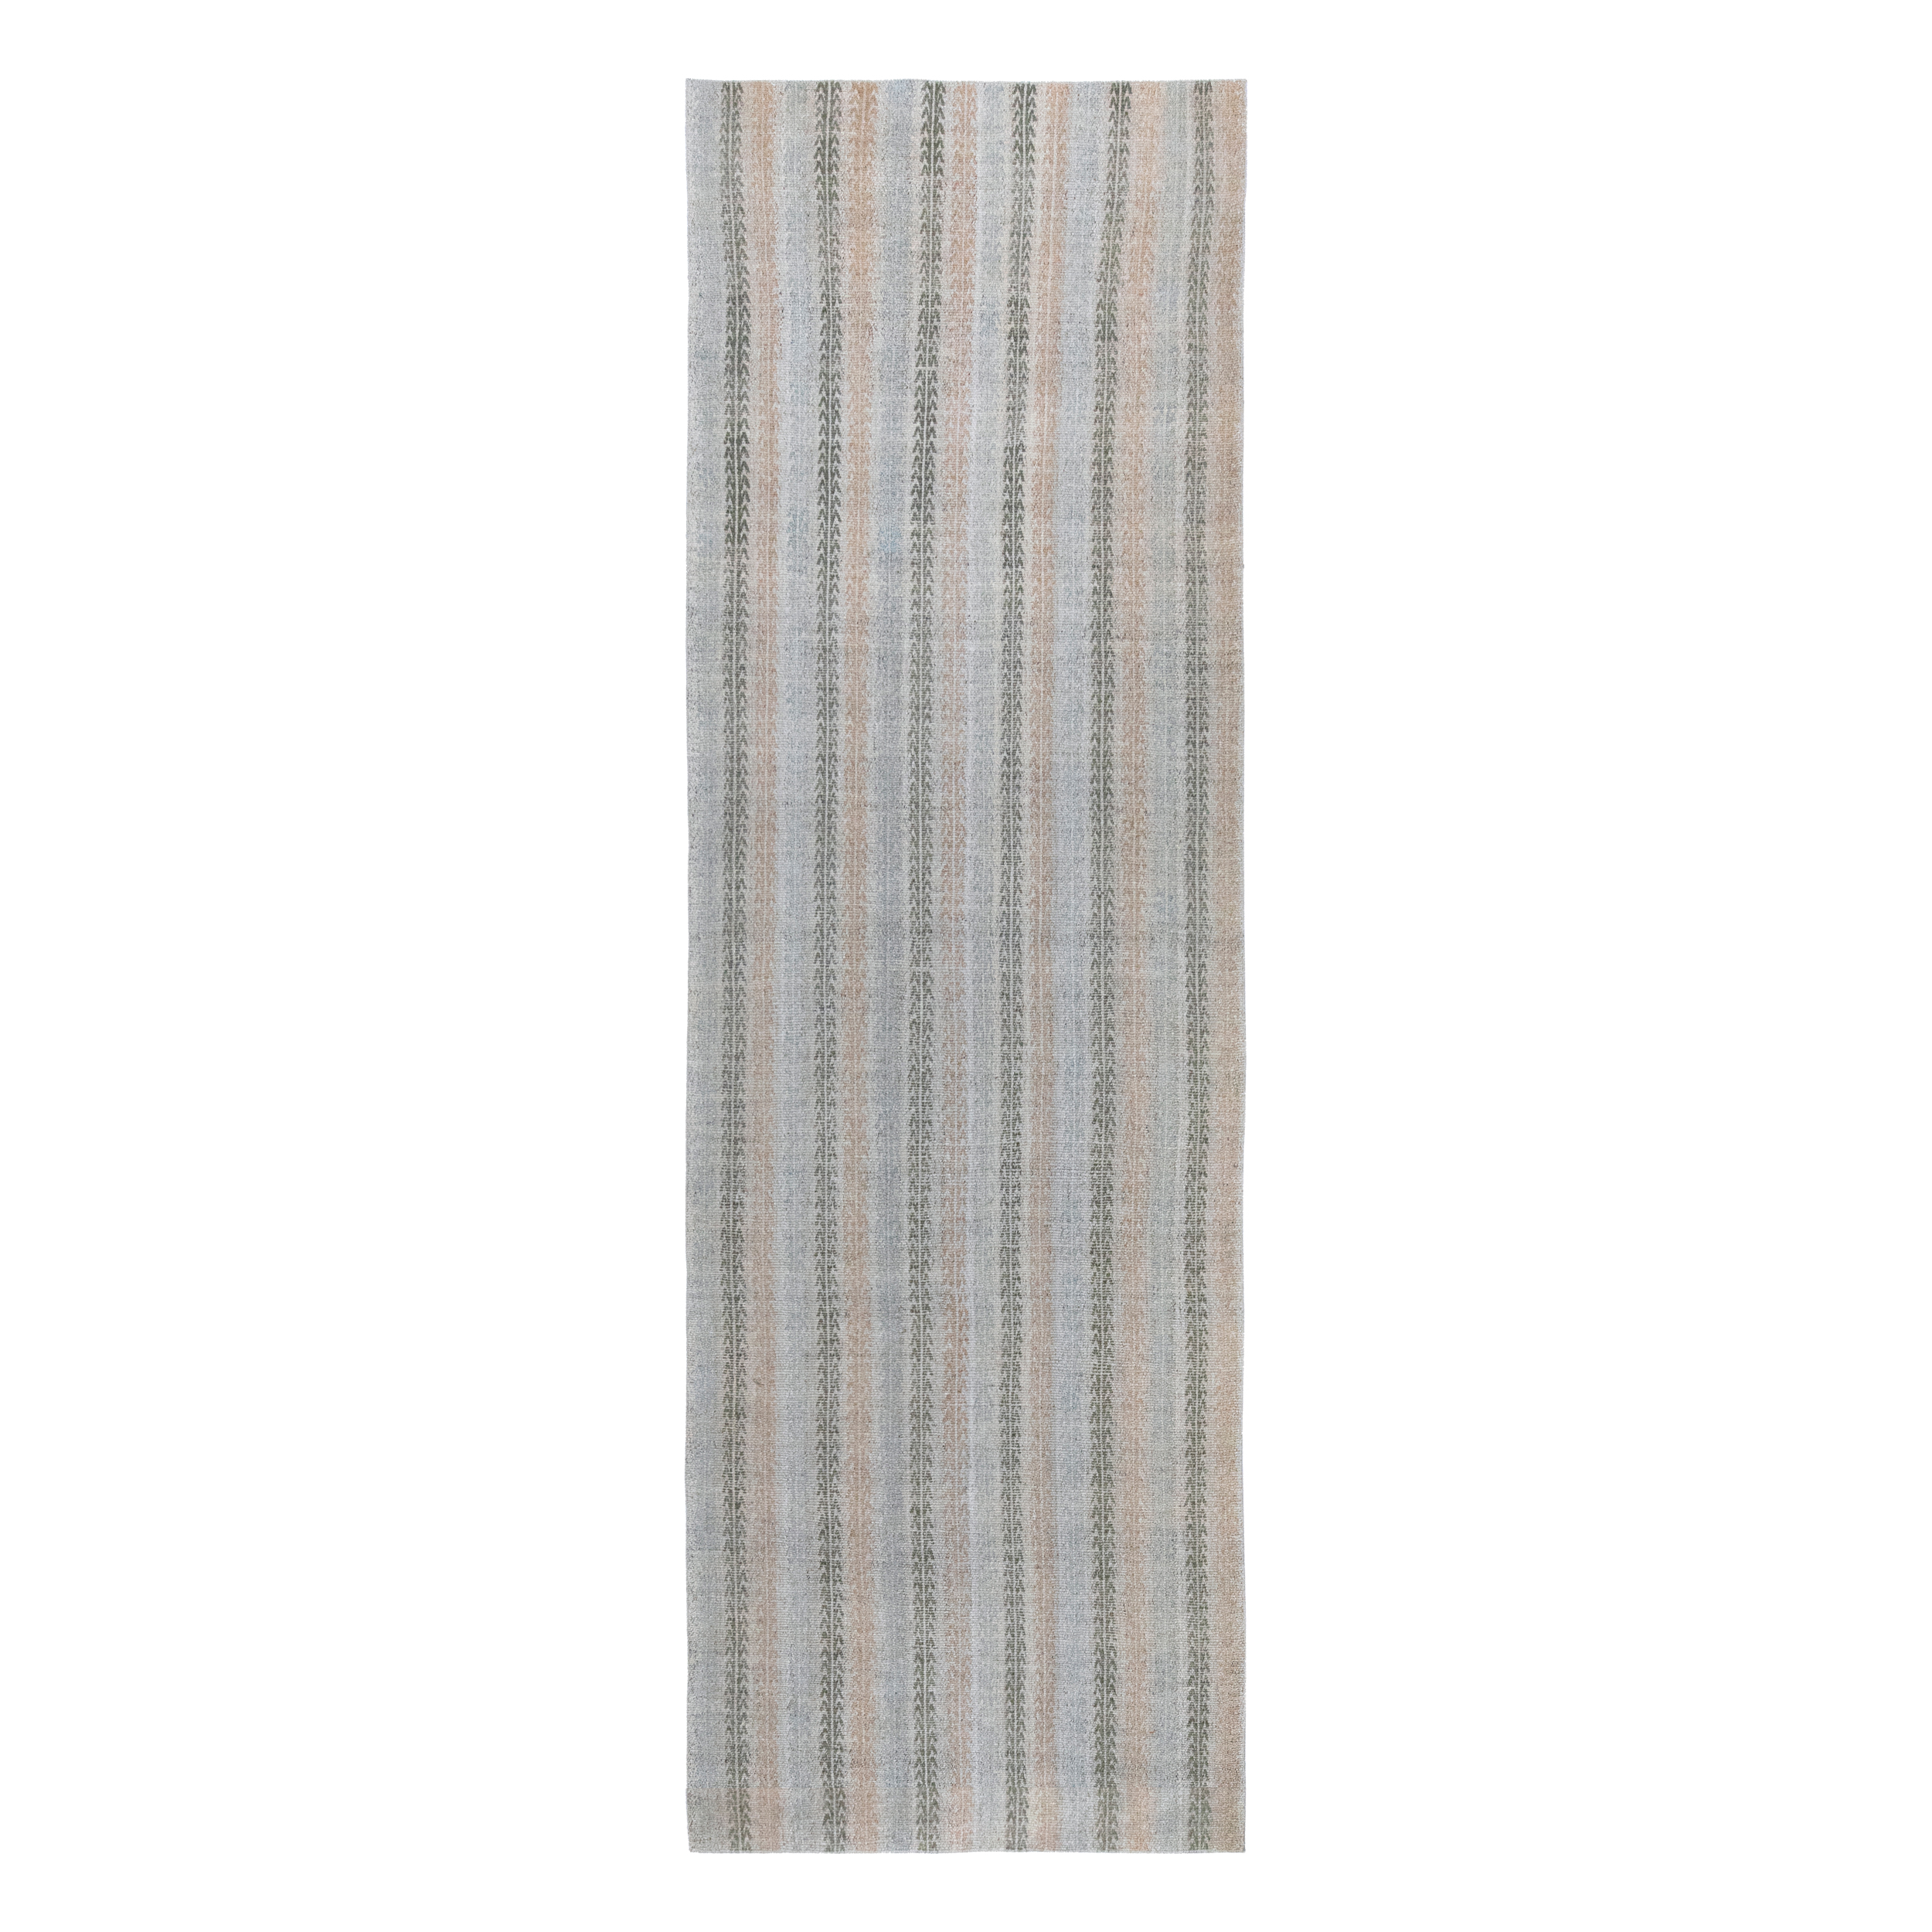 Ricci flatweave made from 100% naturally dyed Persian wool. Inspired by vintage kilims. 